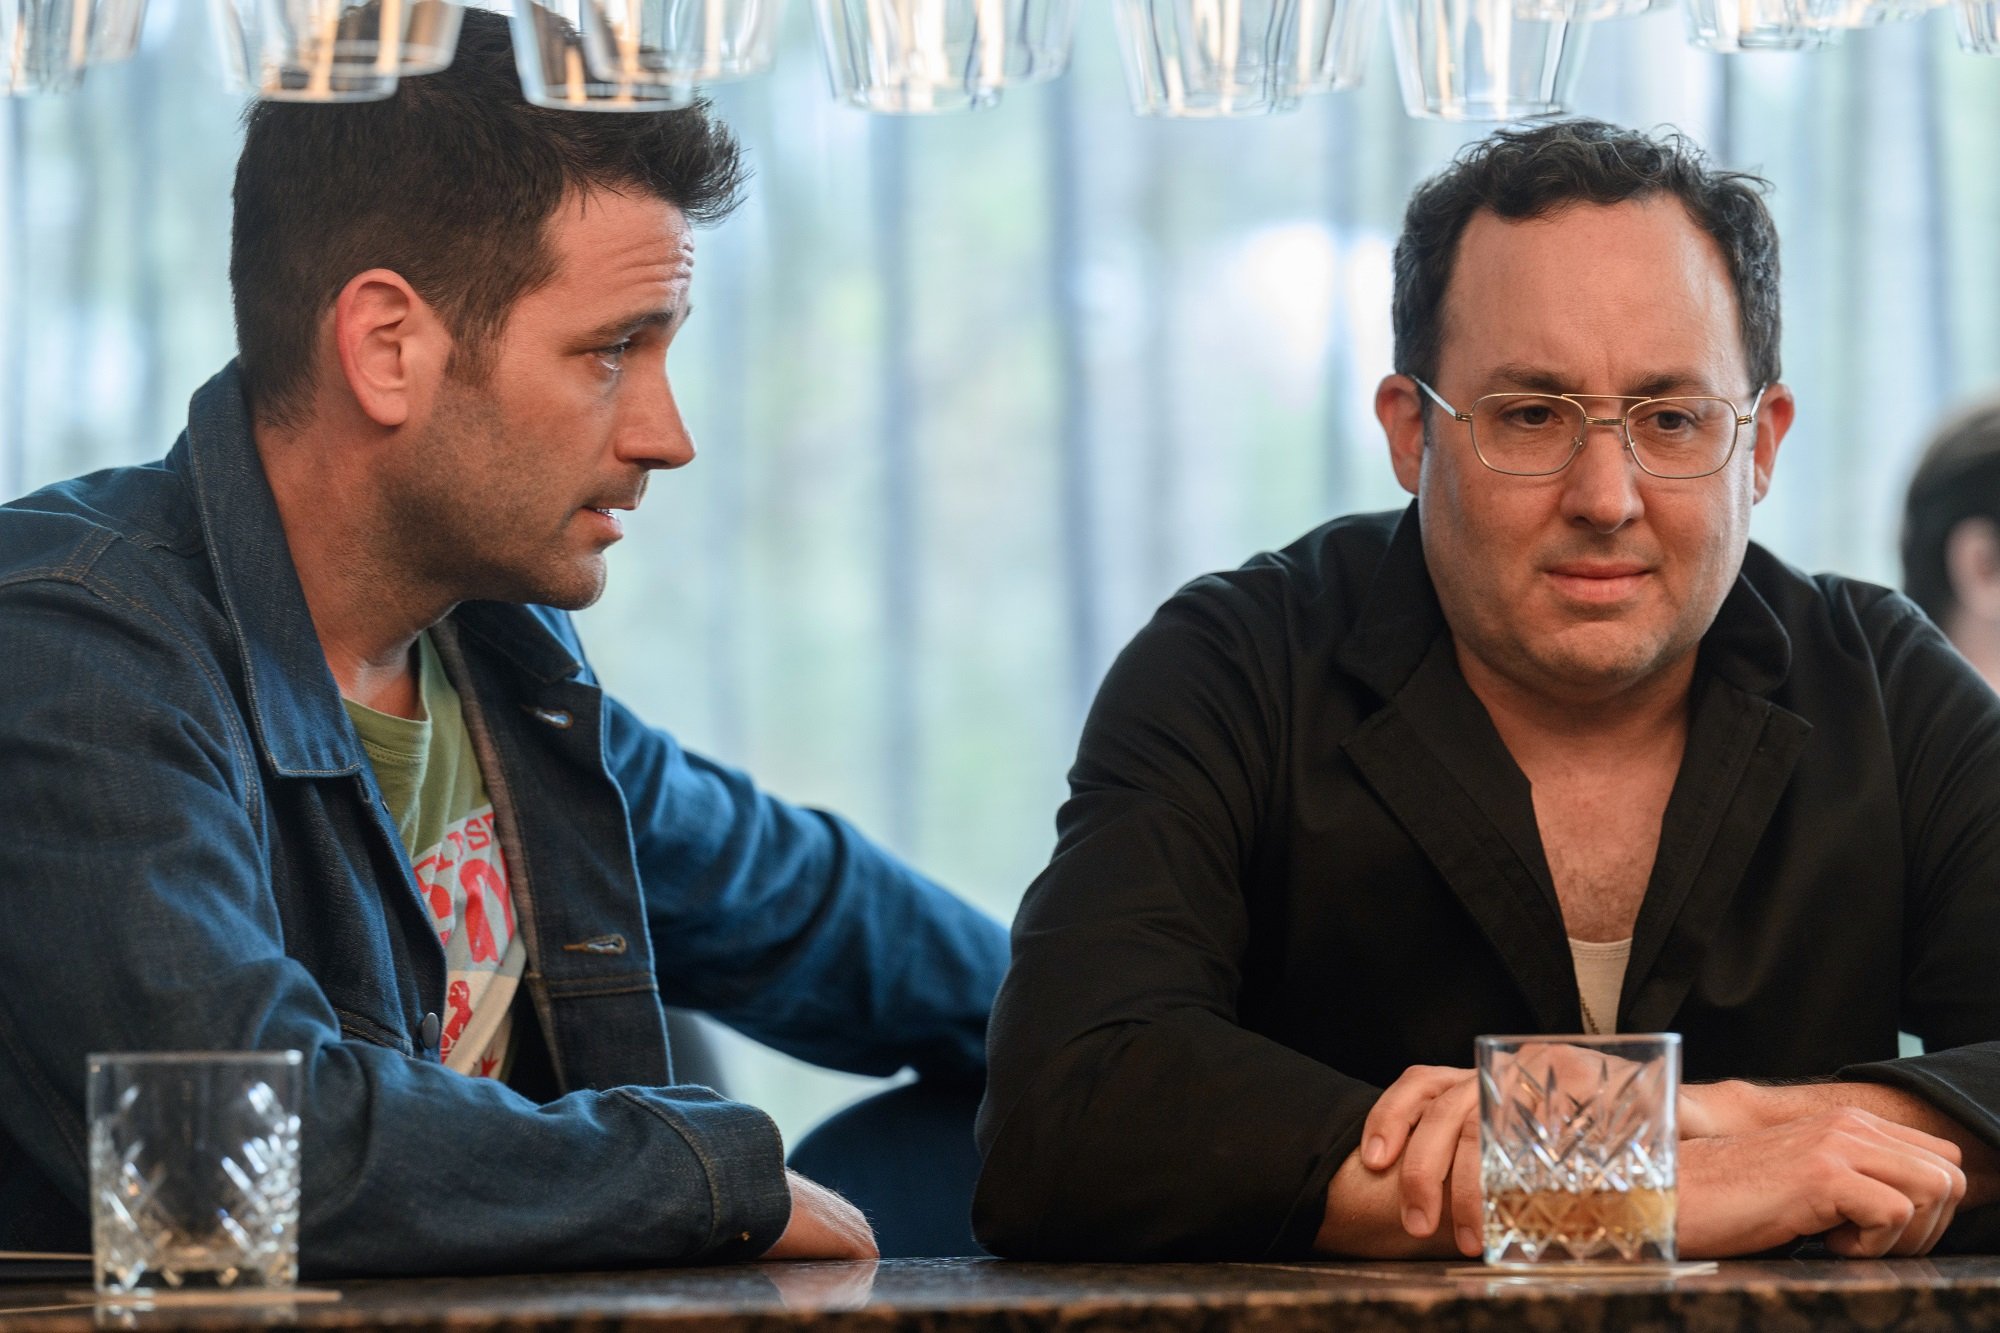 'Irreverent' on Peacock: Colin Donnell as Mack/Paulo, P.J. Byrne as Mckenzie Boyd sitting together at a bar